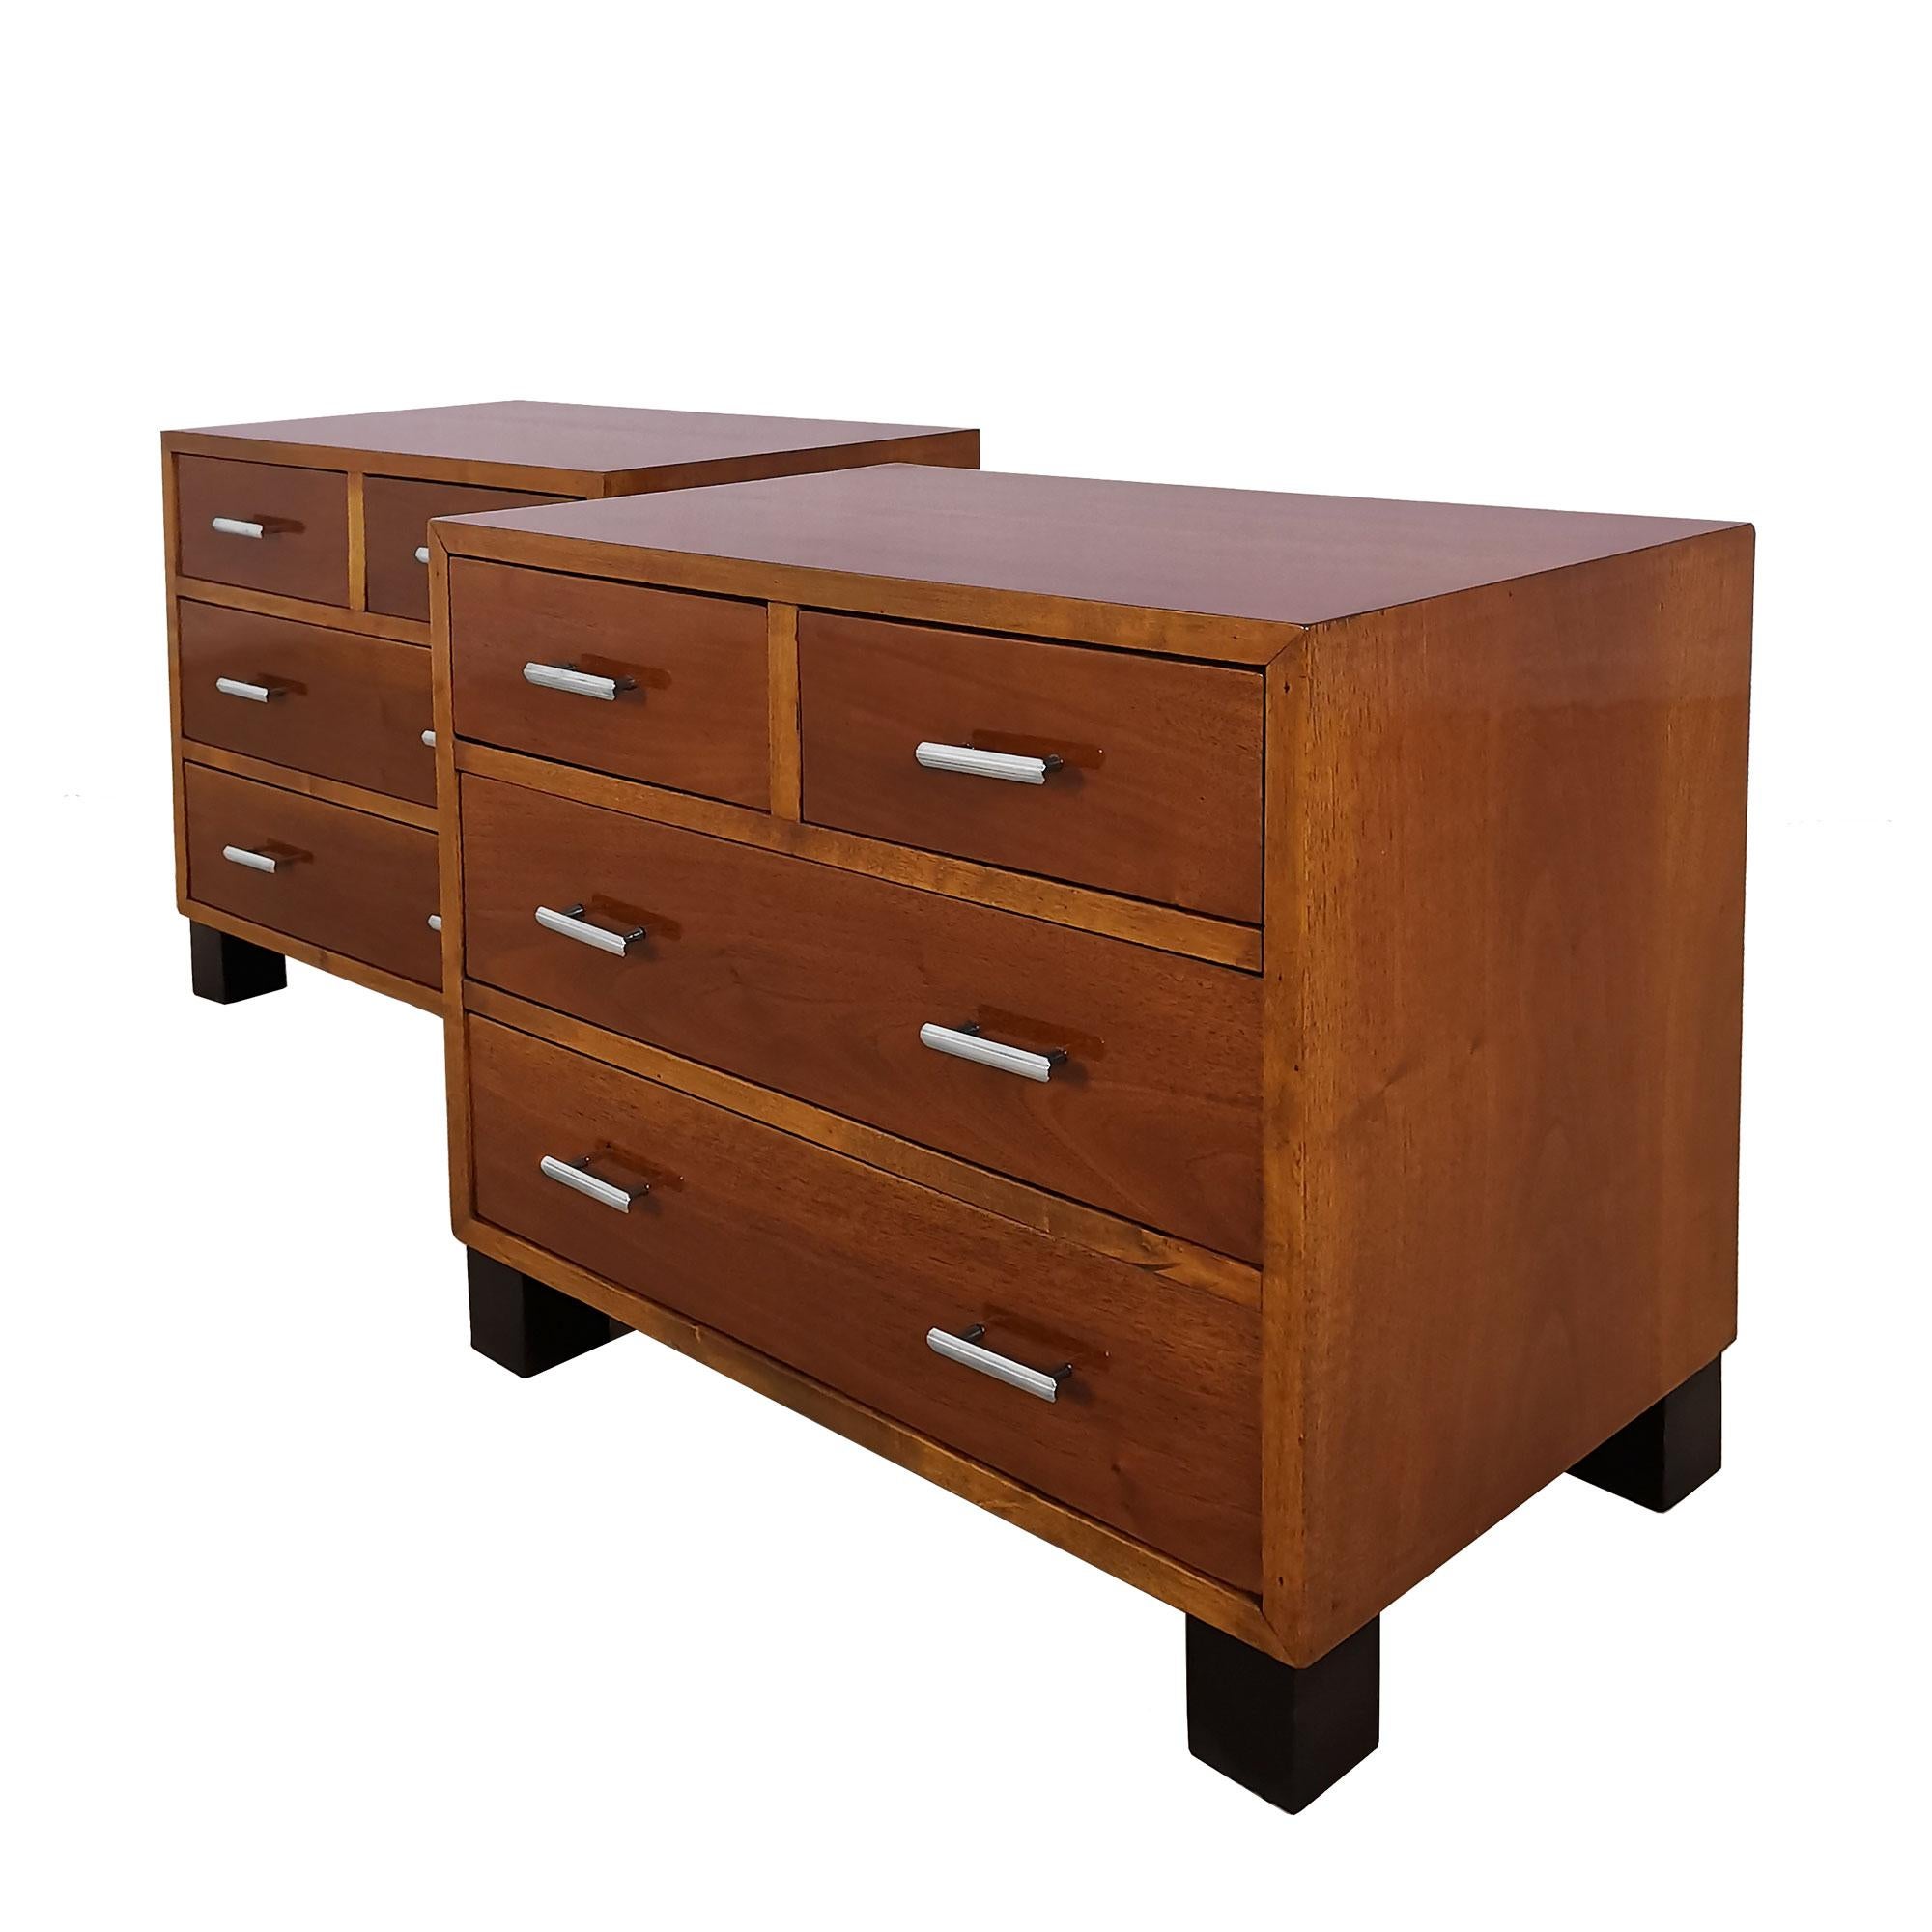 Pair of large night stands, solid wood and light walnut veneer and black stained feet, French polish. Nickel plated metal handles.

Spain, circa 1960.